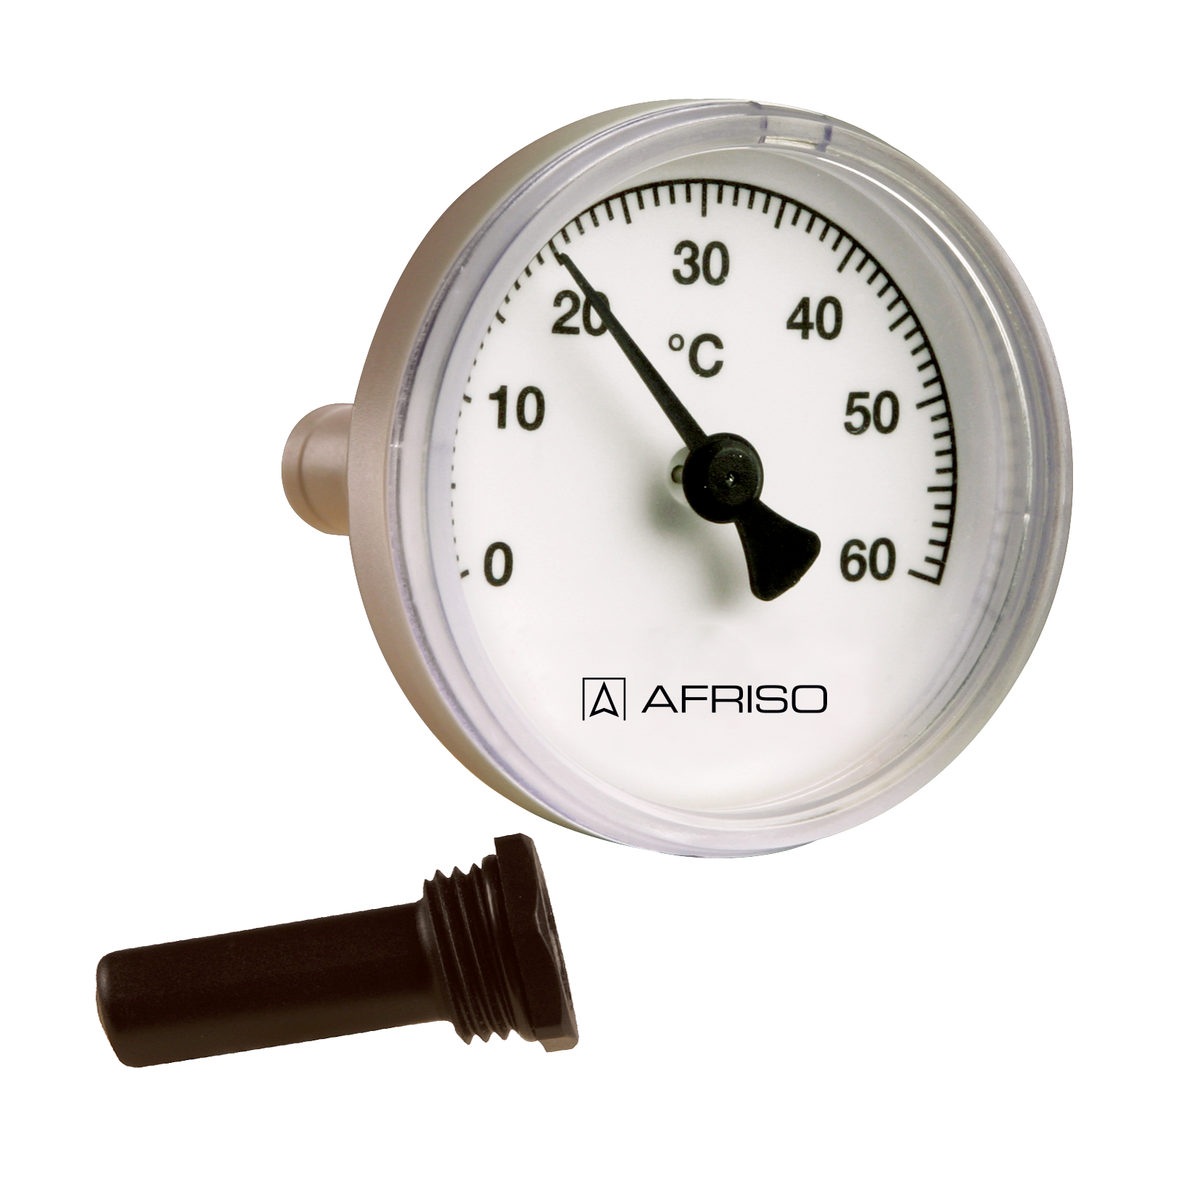 AFRISO Bimetall-Thermometer BiTh 50 K 0/60C 40mm 1/2 axial Kl.2 SAL 87740 object_image_57154imagemain_en